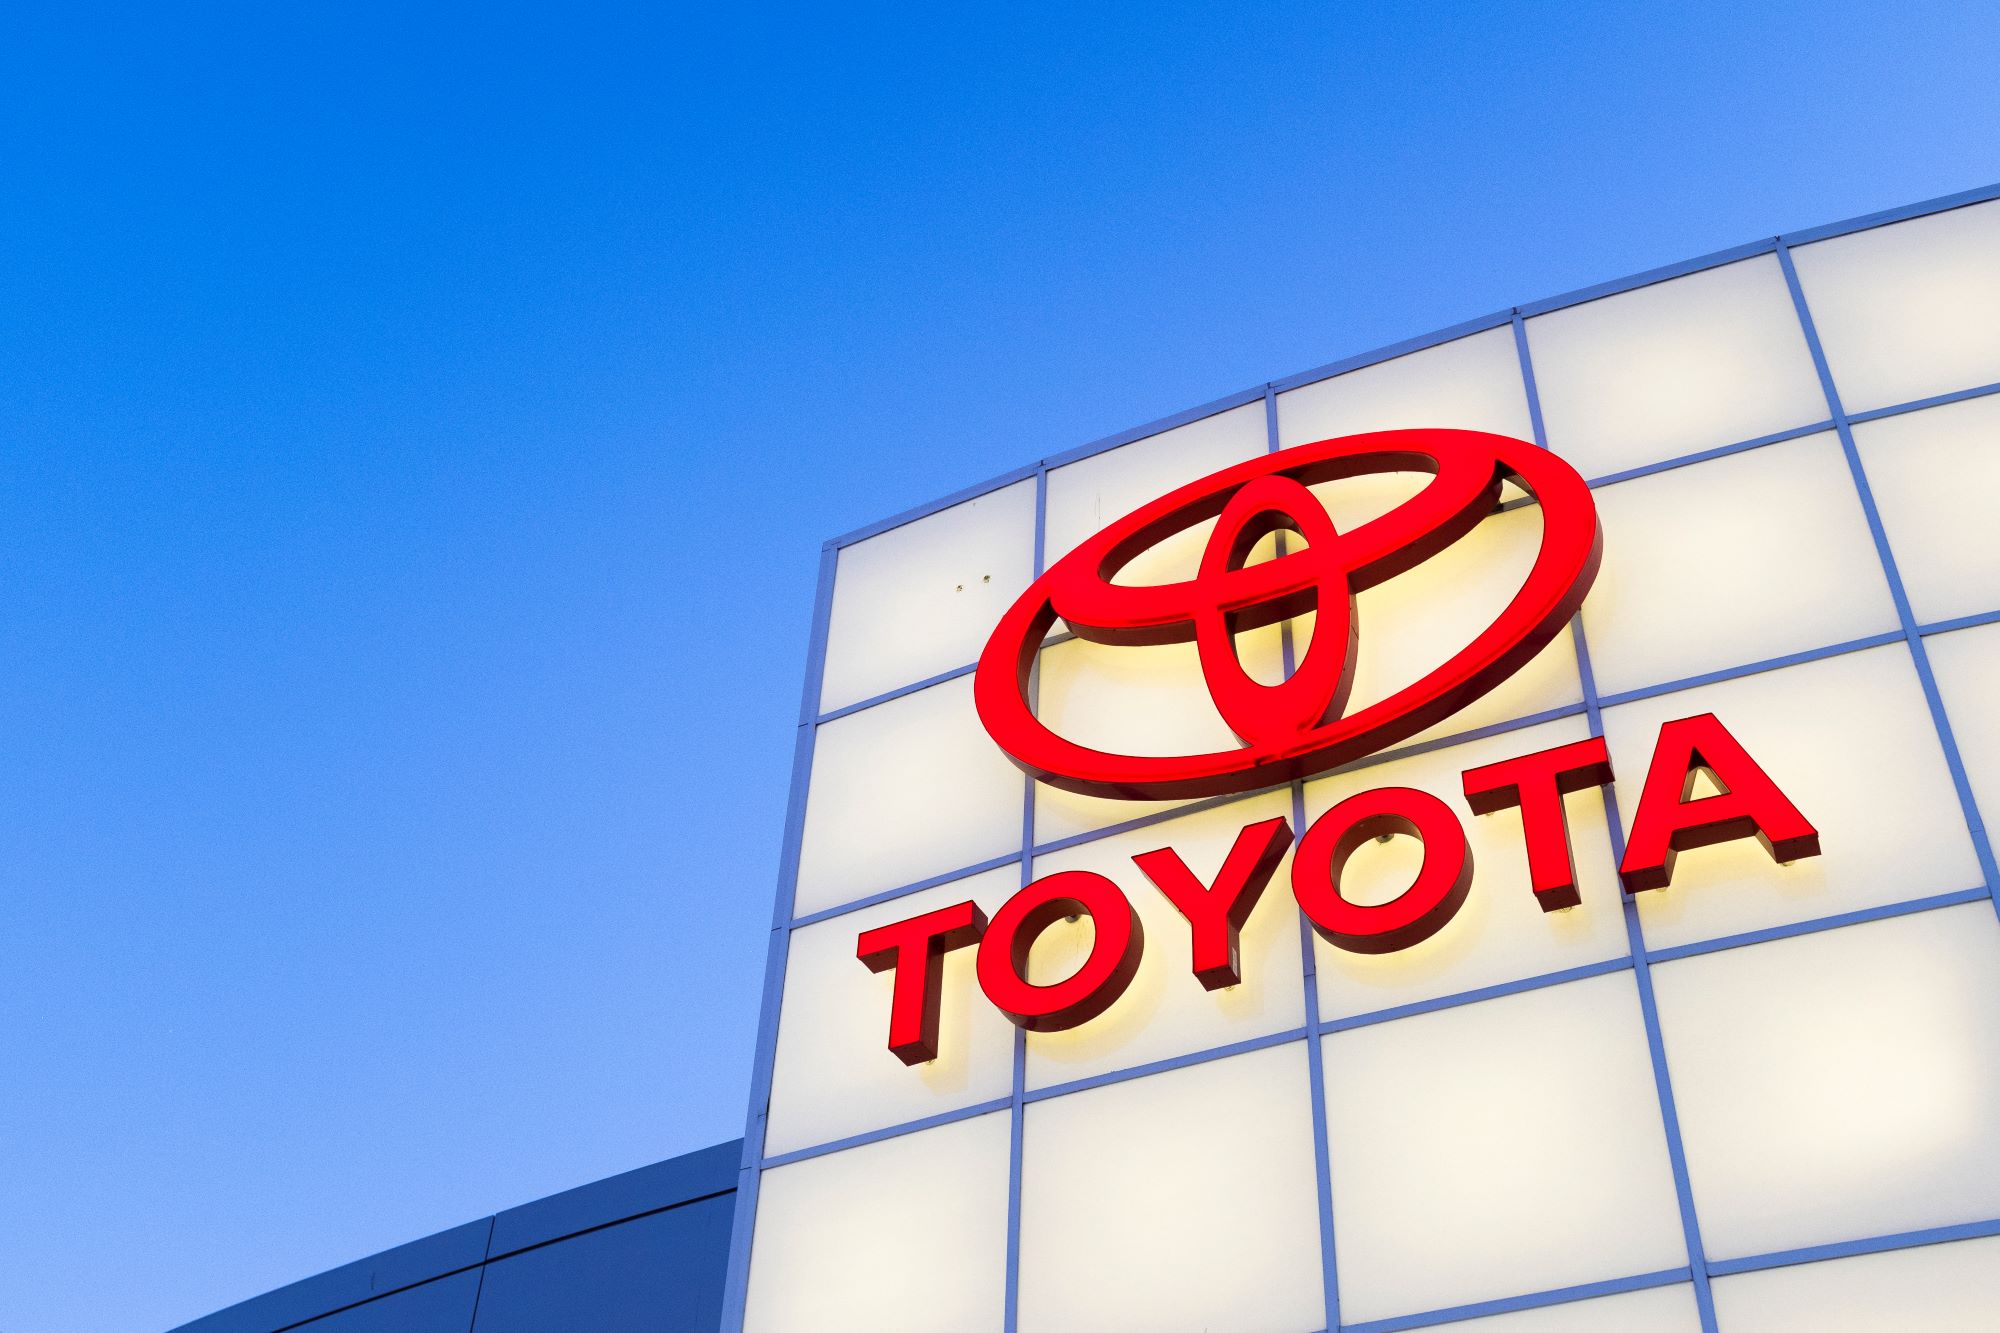 A red Toyota logo with Toyota written under it on a white background with a clear sky in the background.